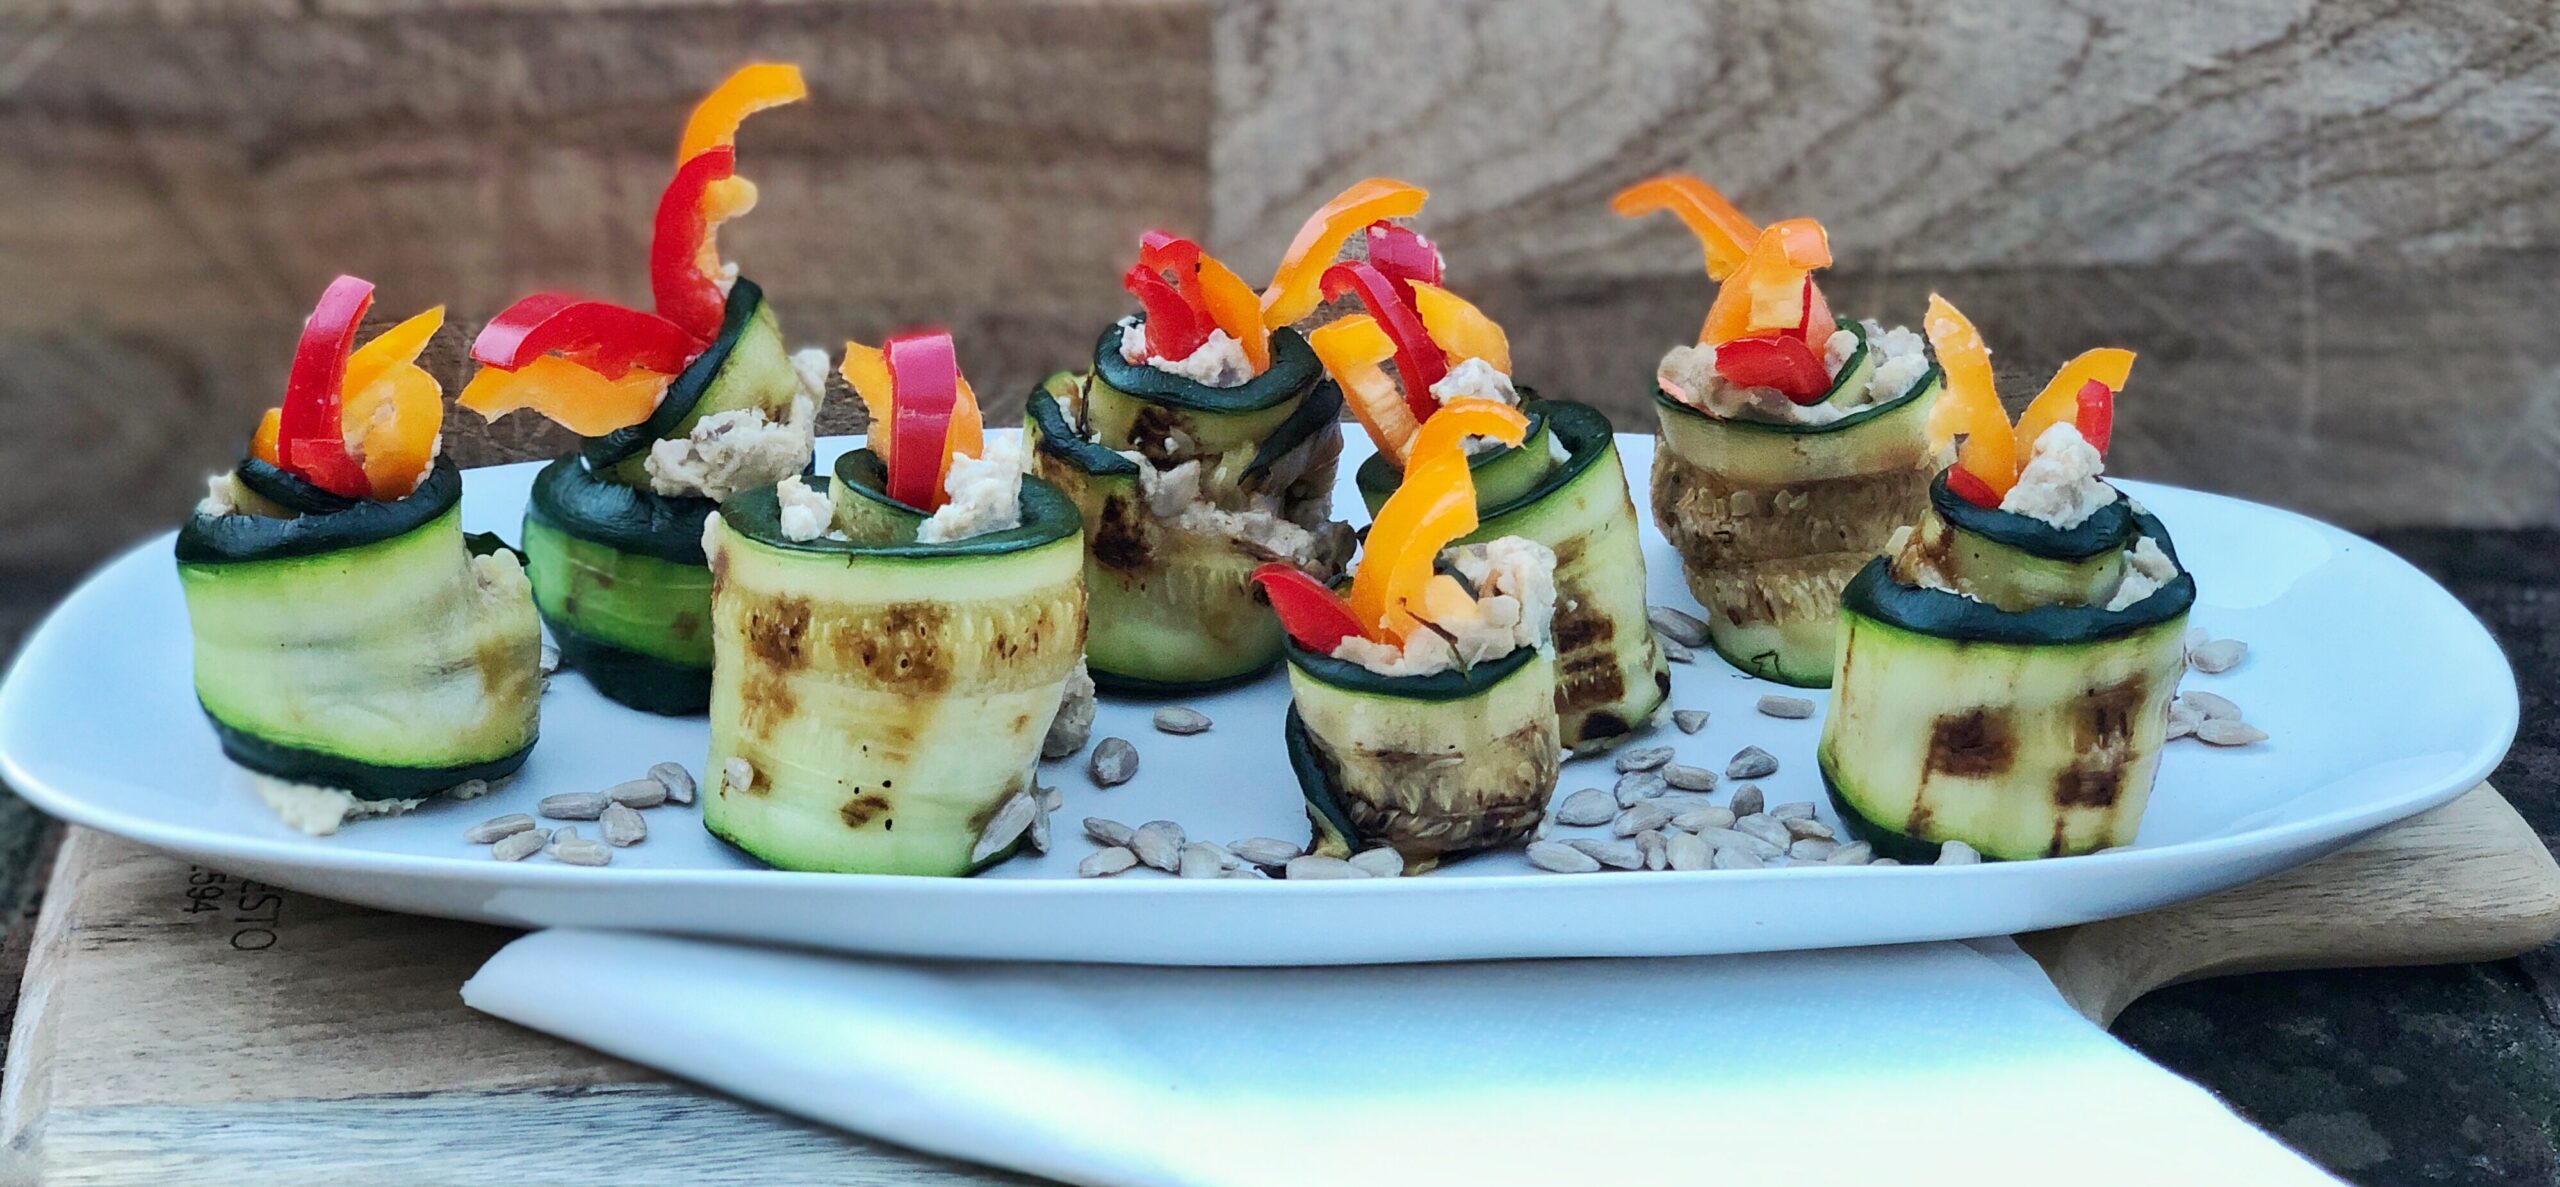 Vegan courgette rolls stuffed with sunflower seed hummous